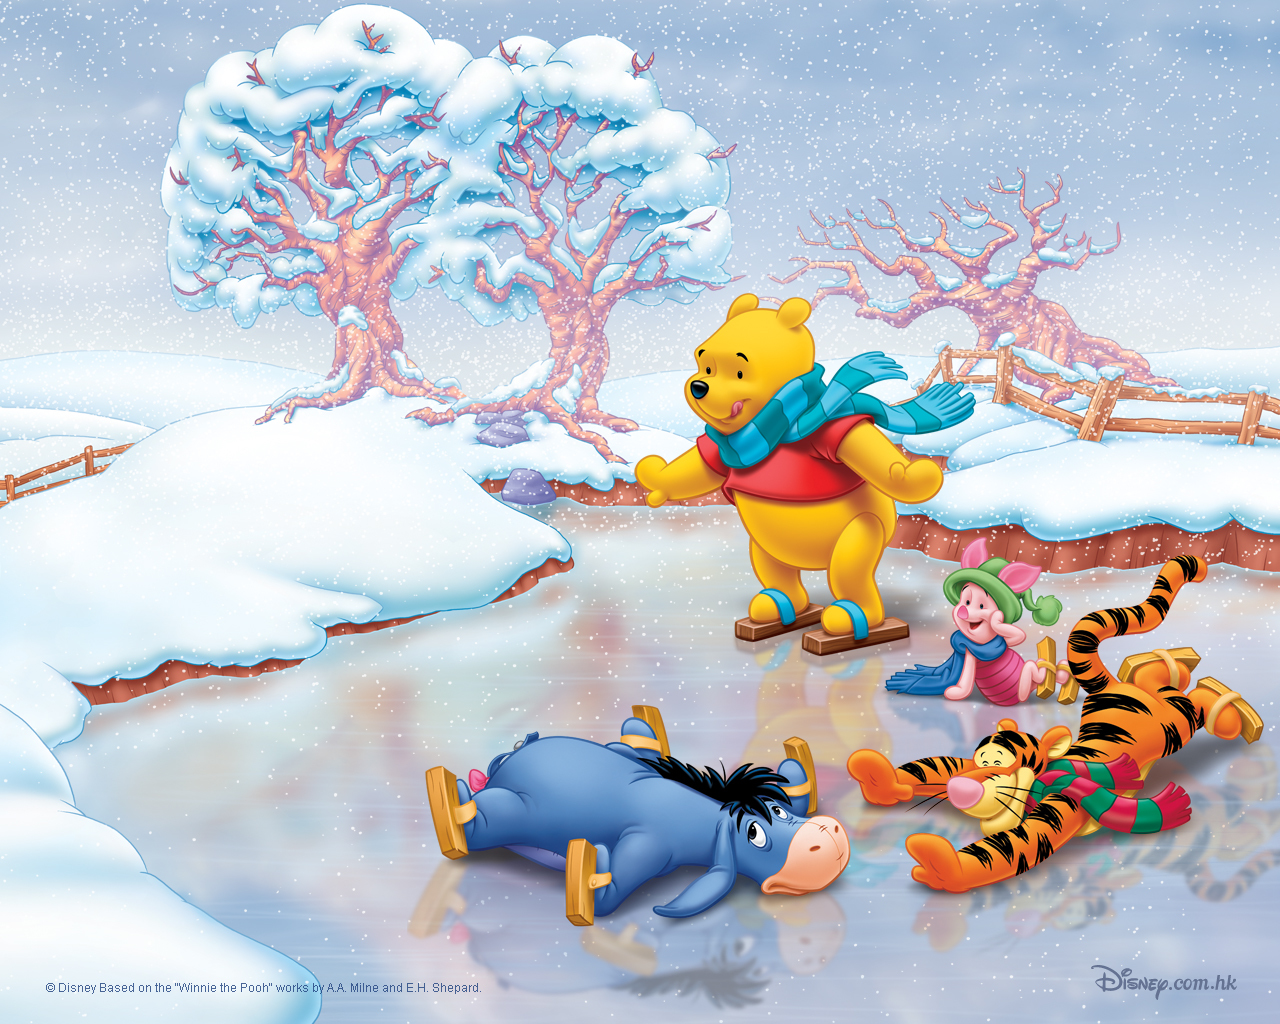 winnie the pooh, pictures, winter, cartoon, ice, snow